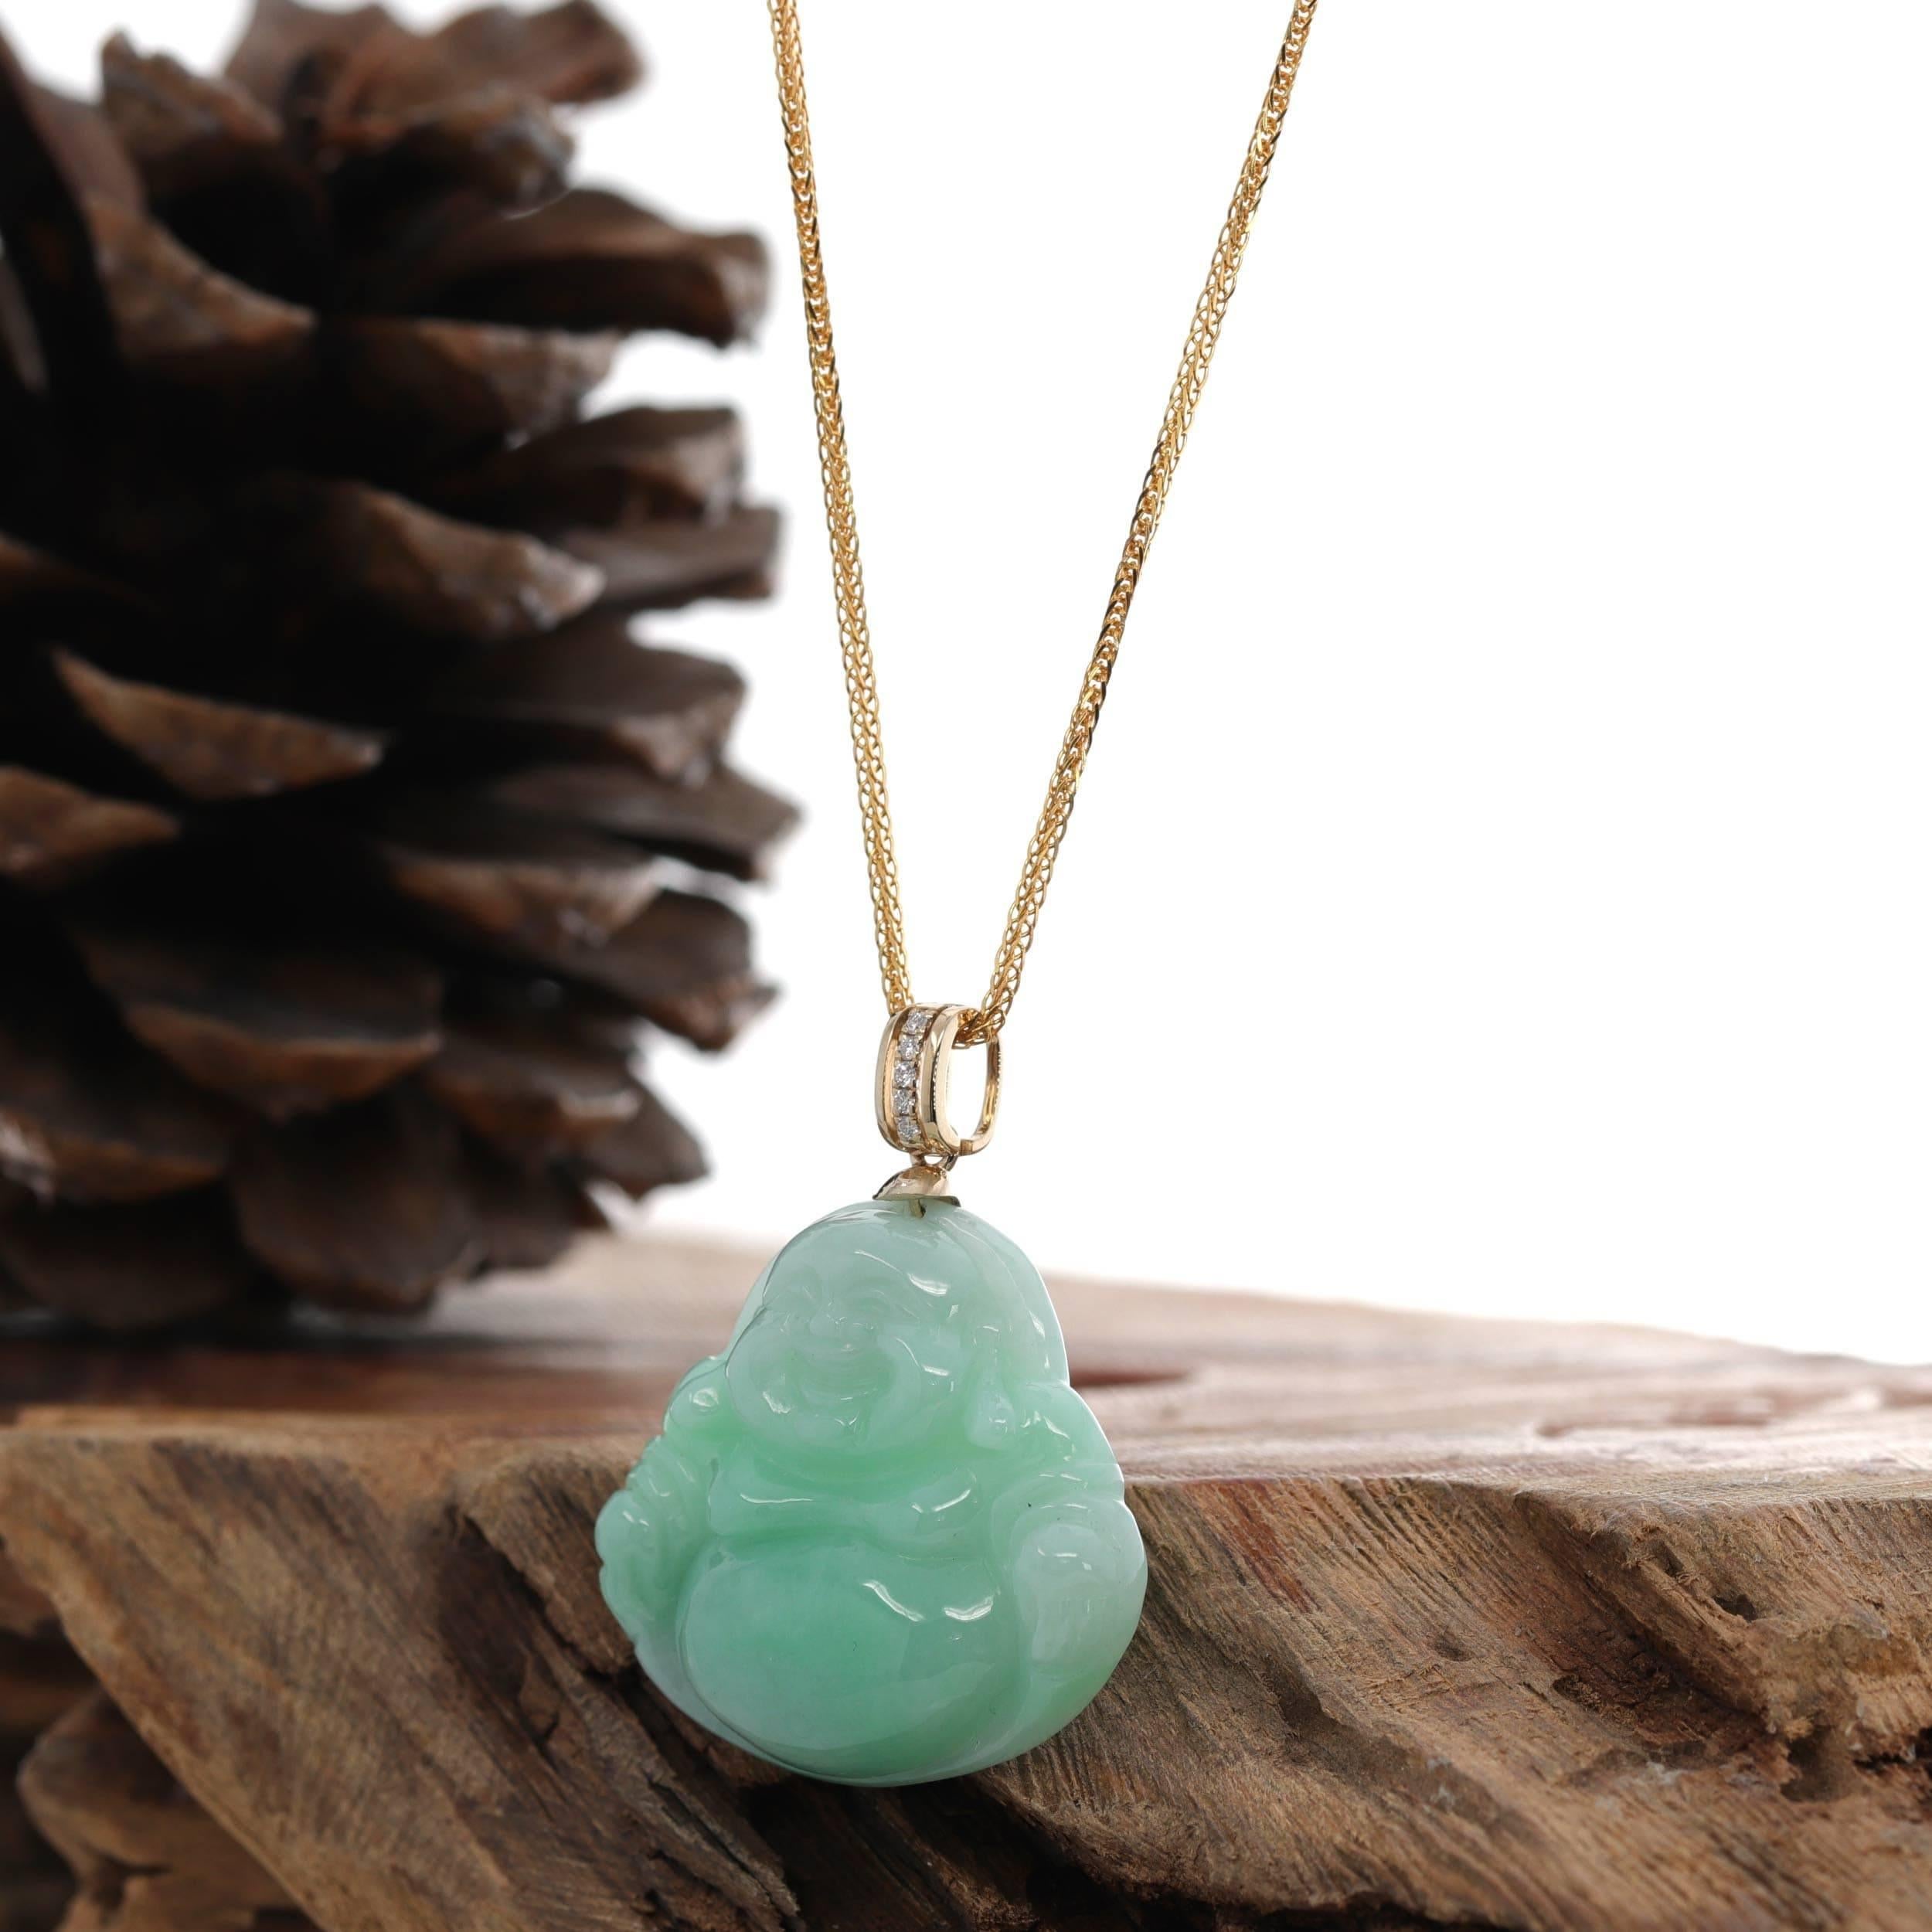 * Details---14k Yellow Gold & Genuine Apple Green Nephrite Jade Buddha Pendant Necklace With SI Diamonds Bail. The person who wears a Buddha pendant around the neck attracts positive energy. They emit positive waves into the environment around them.